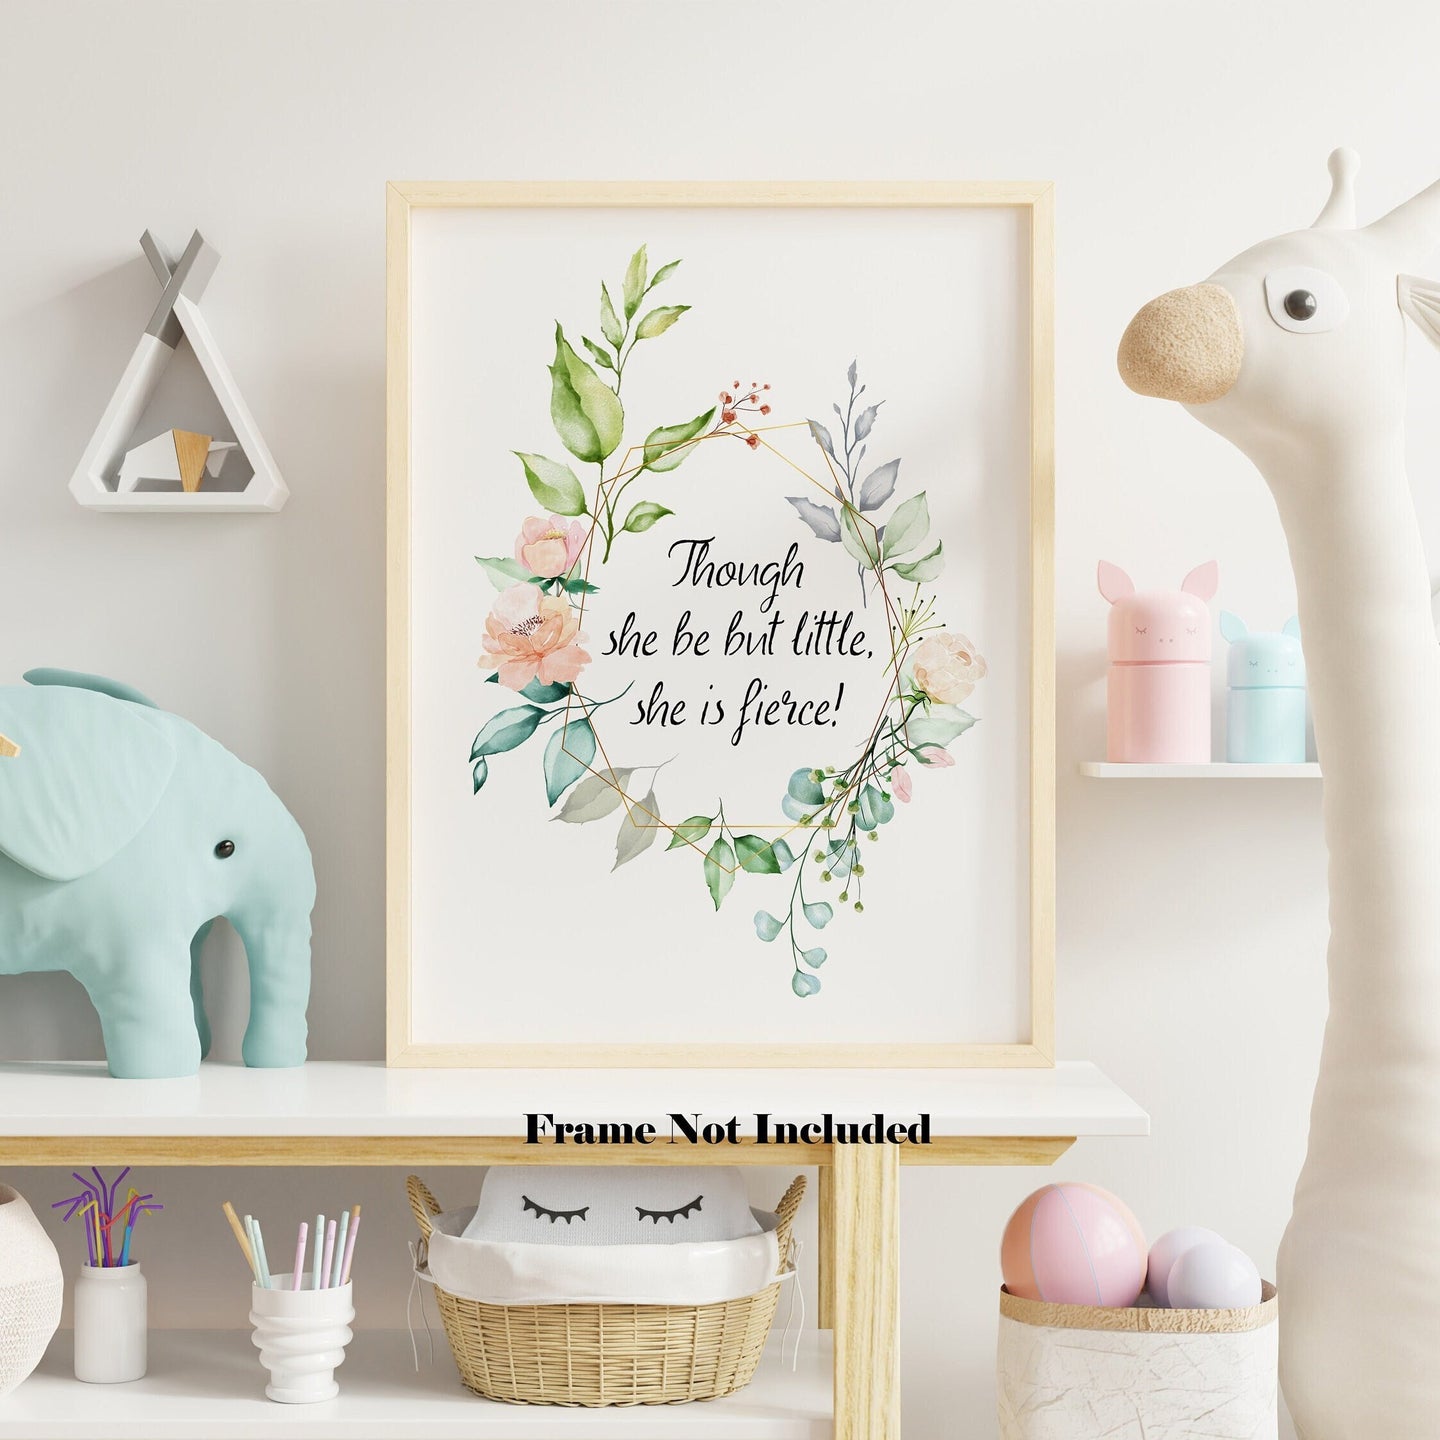 Shakespeare Quote - Though she be but little, she is fierce! - A Midsummer Night's Dream - Physical Art Print Without Frame